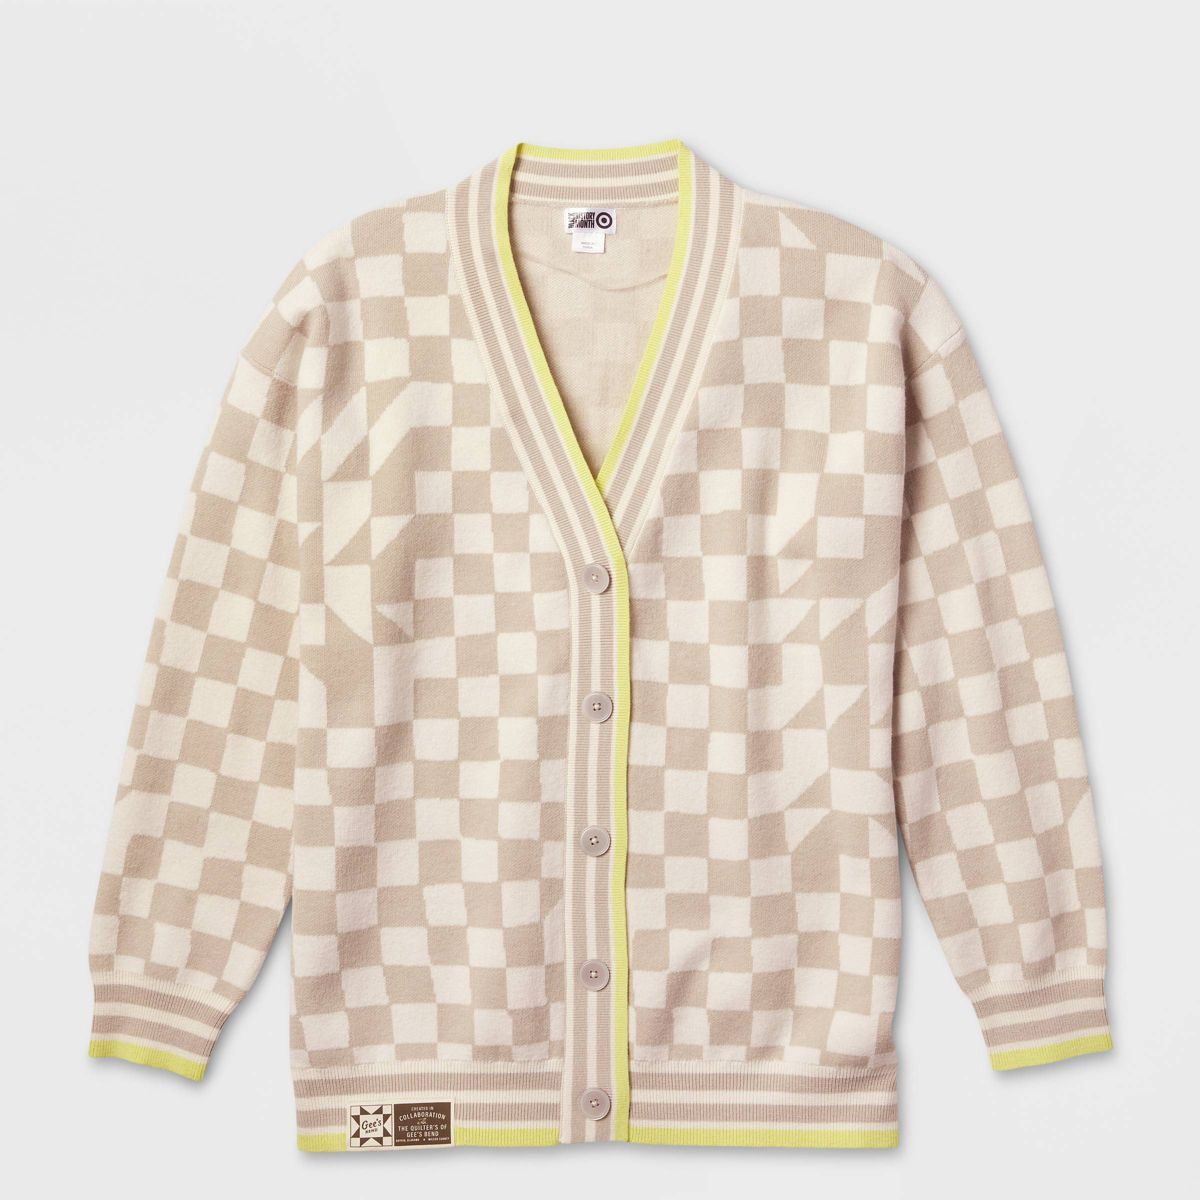 Black History Month Adult Gee's Bend Cardigan - Cream L | Target